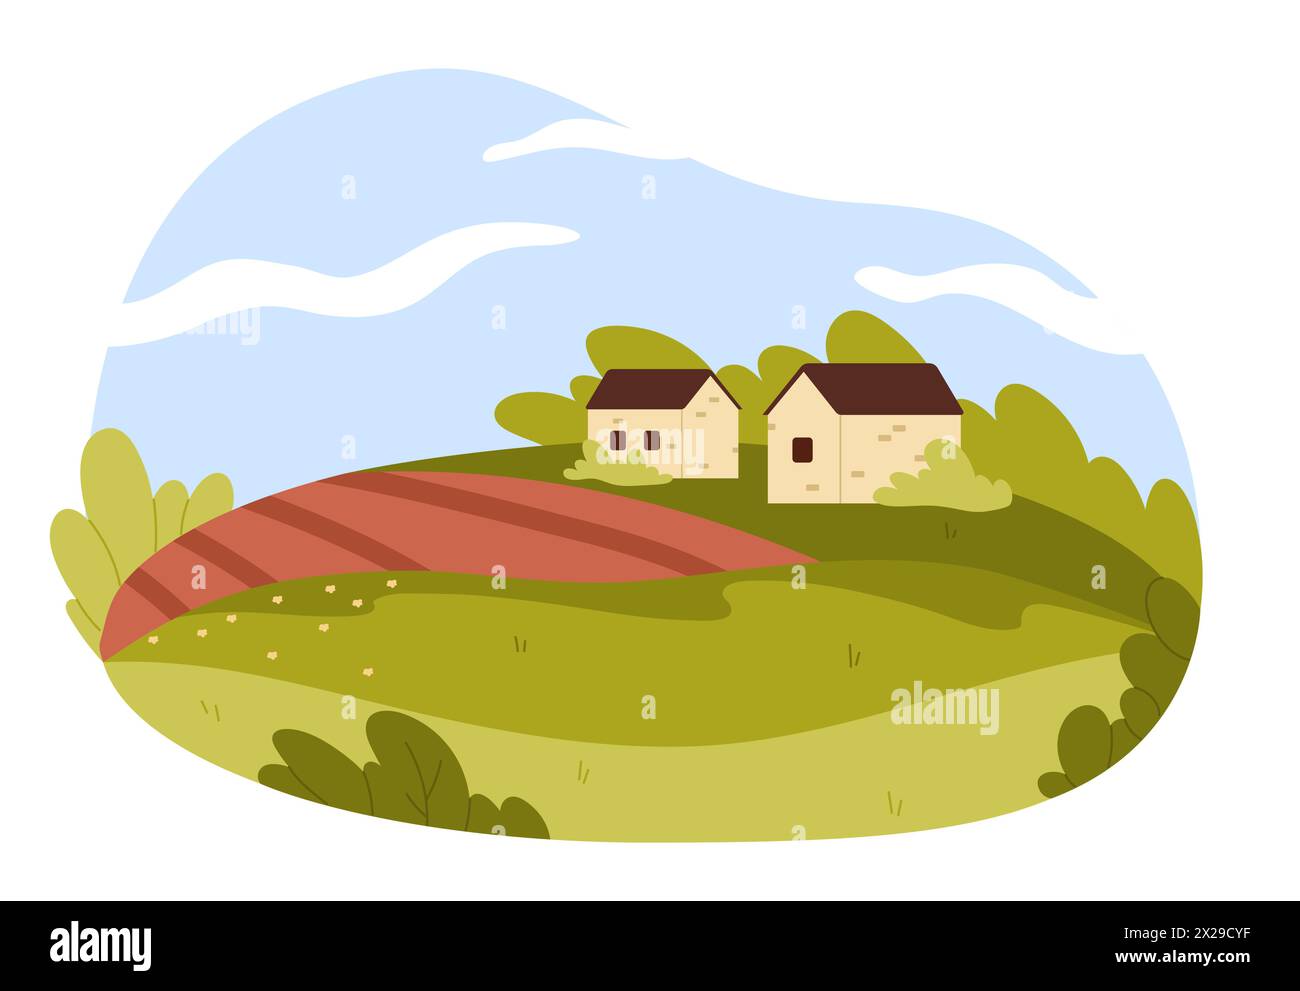 A charming scene with two quaint cottages nestled among green rolling hills, patches of red fields, and expansive blue sky solated Stock Vector